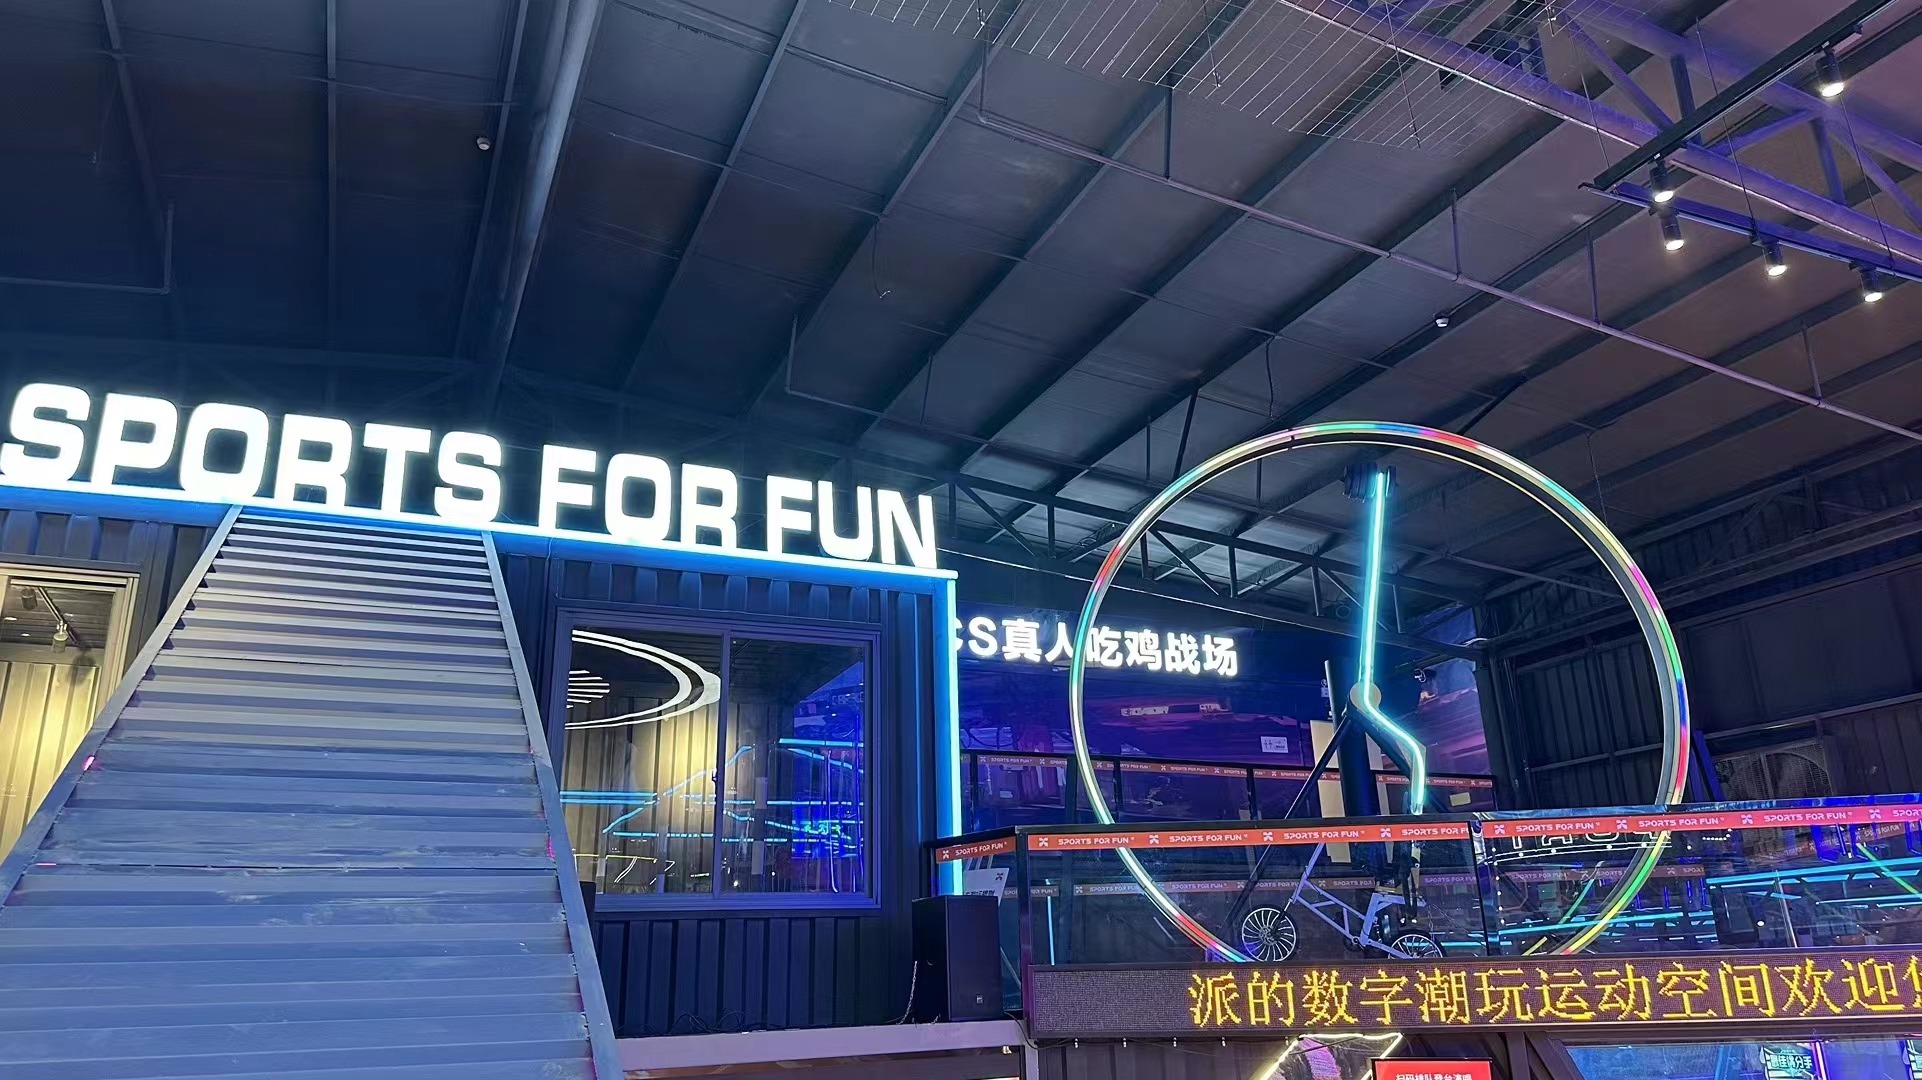 How Dose The Family Sports Center Make Money - News & Cases - Guangzhou Ysam Amusement